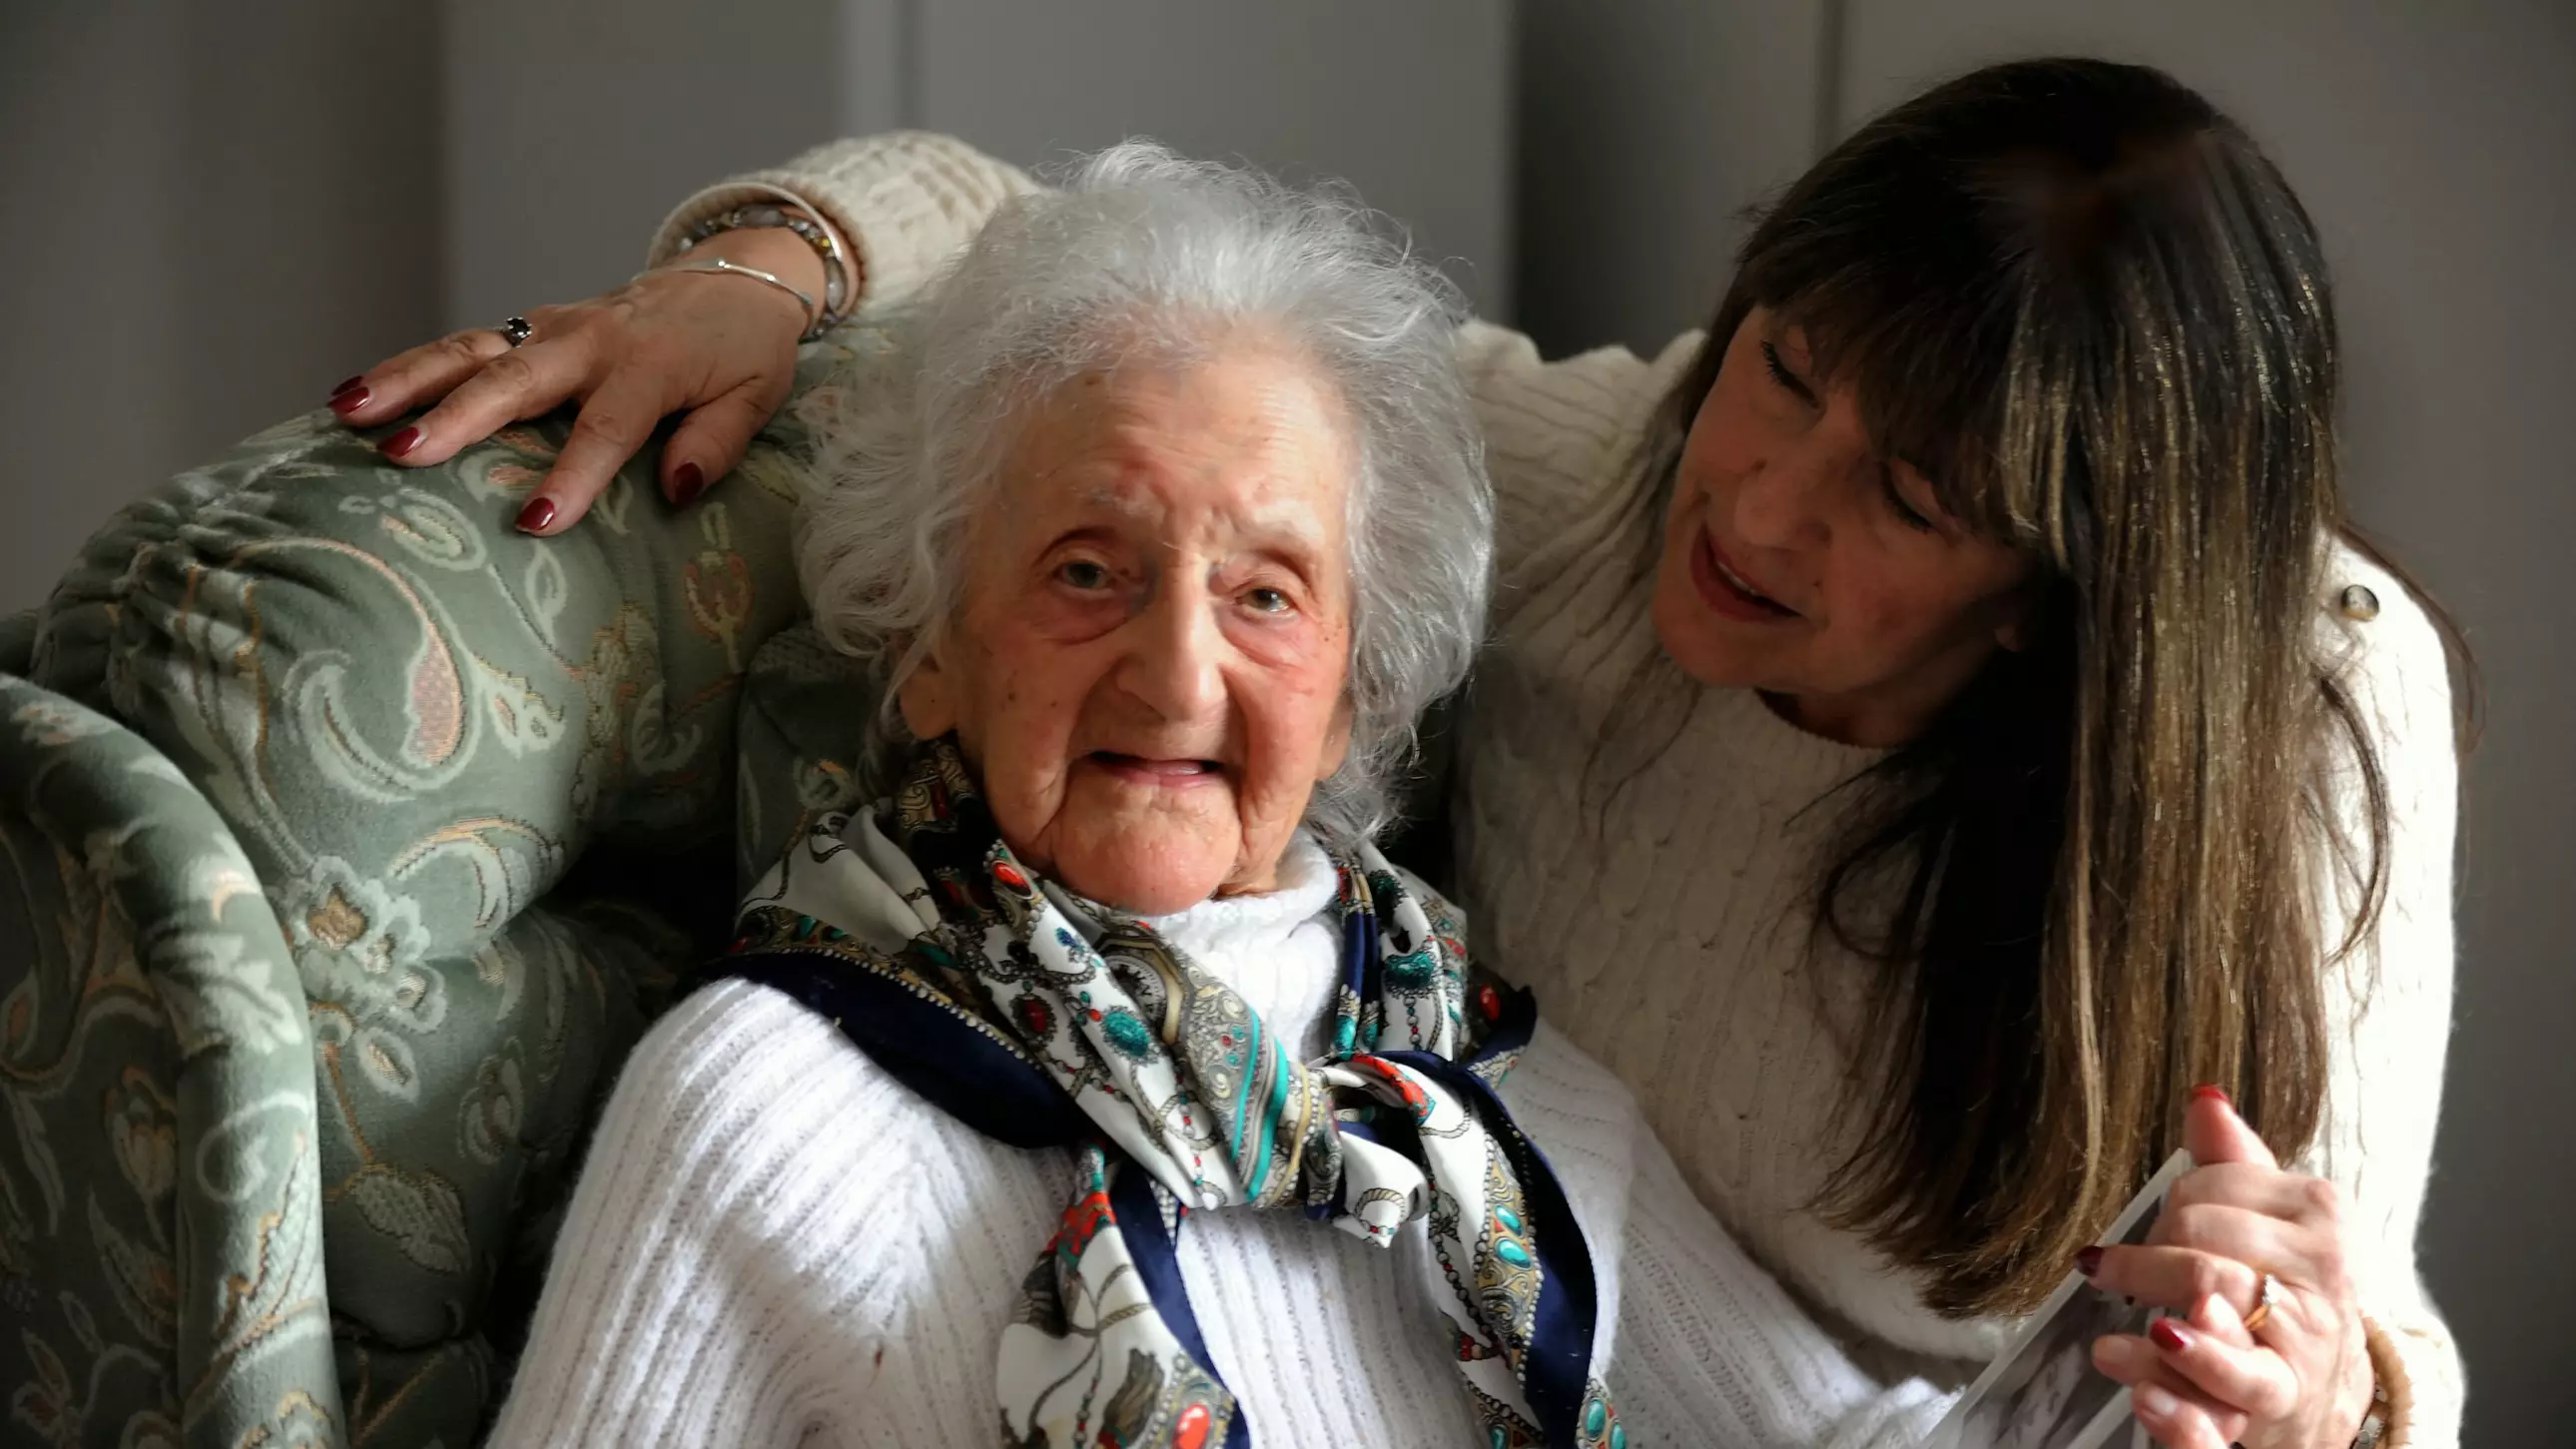 102-Year-Old Woman Given Just Hours To Find New Home 